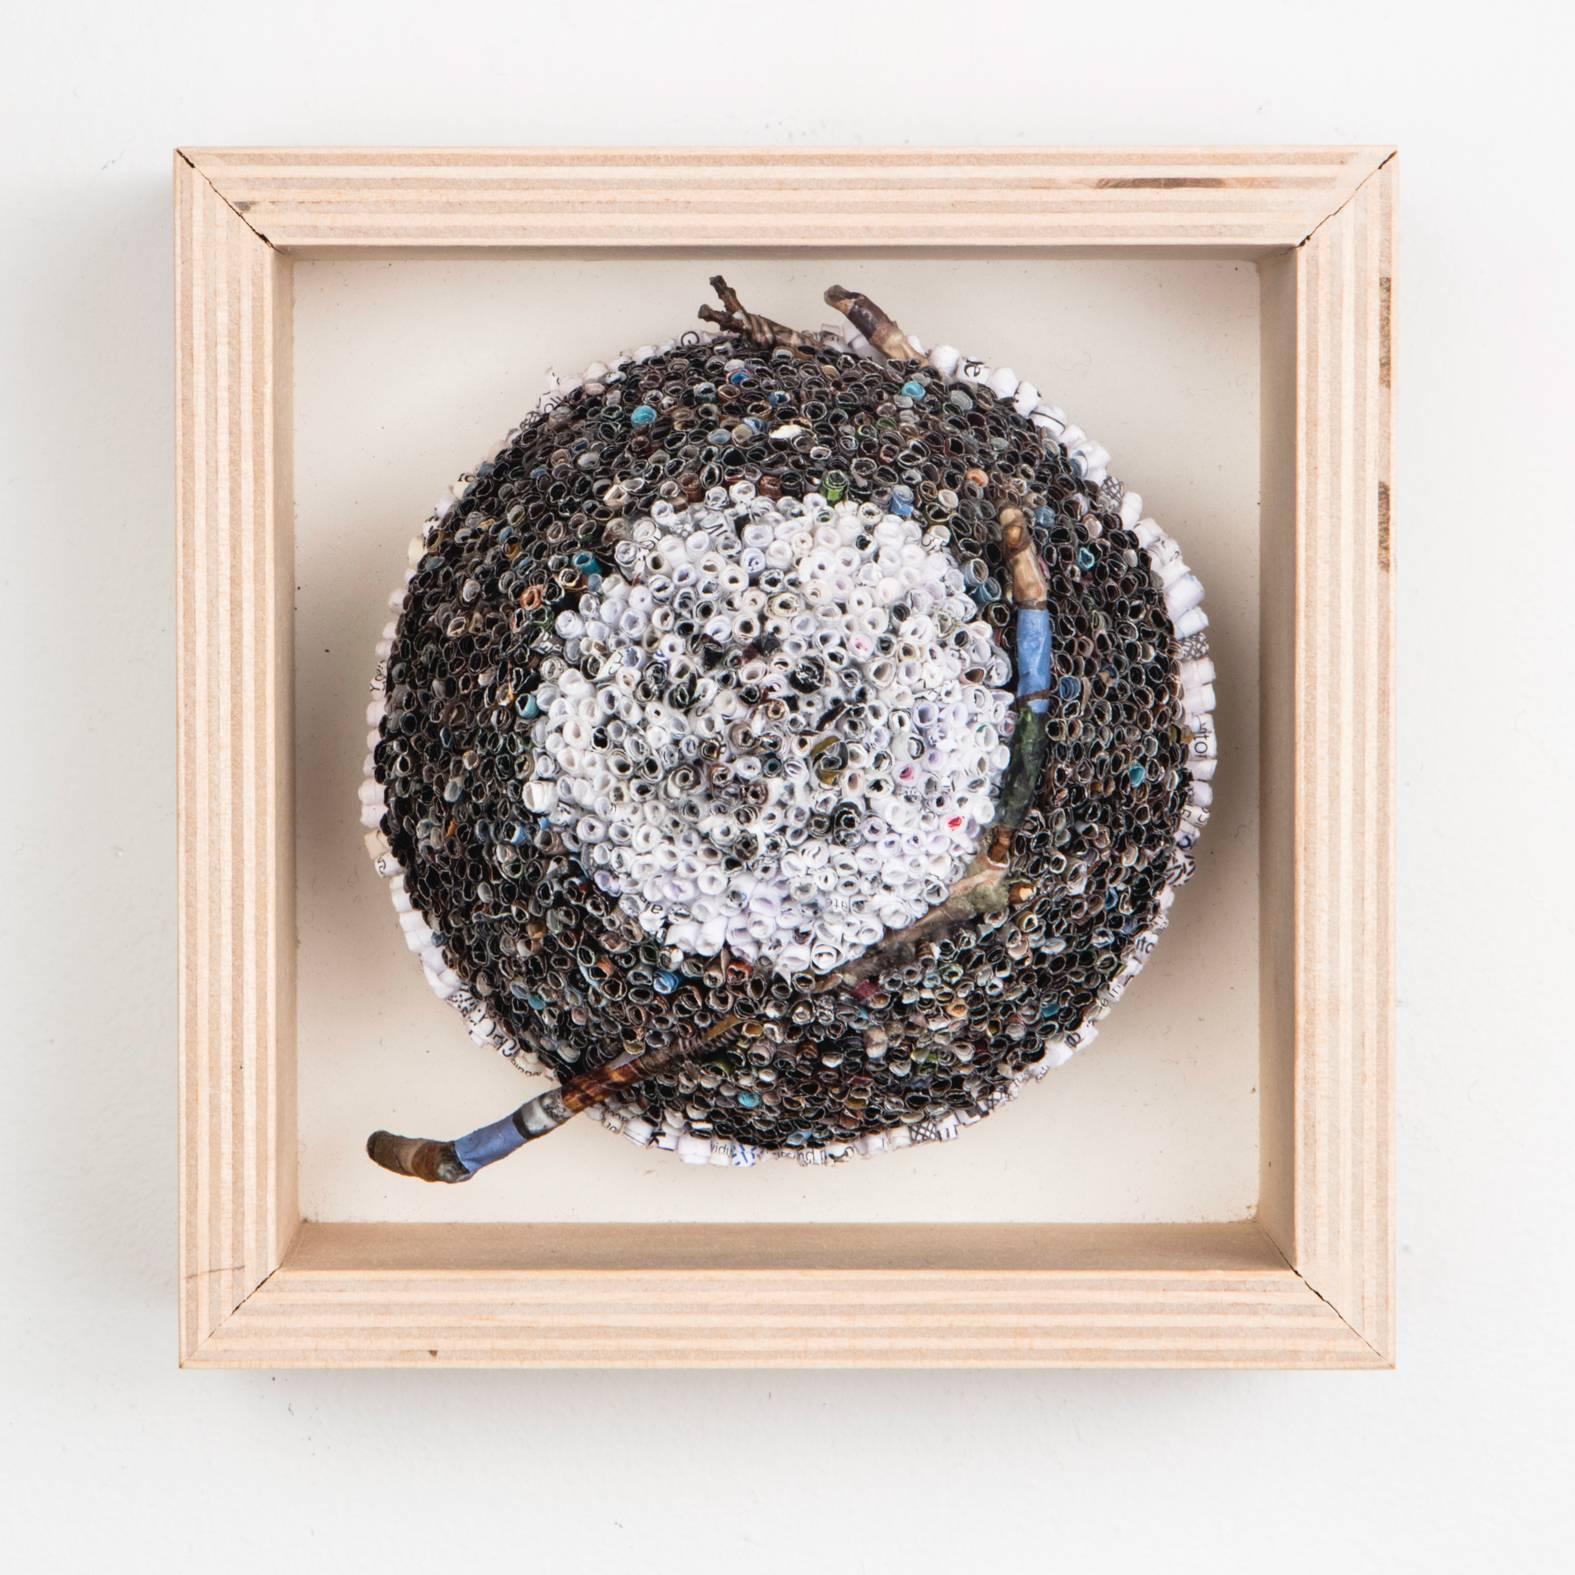 Jaynie Gillman Crimmins, a Brooklyn based artist, has been creating art from her shredded financial statements and mail since 2009.  She currently works with her junk mail which is difficult to recycle because the inks have high concentrations of